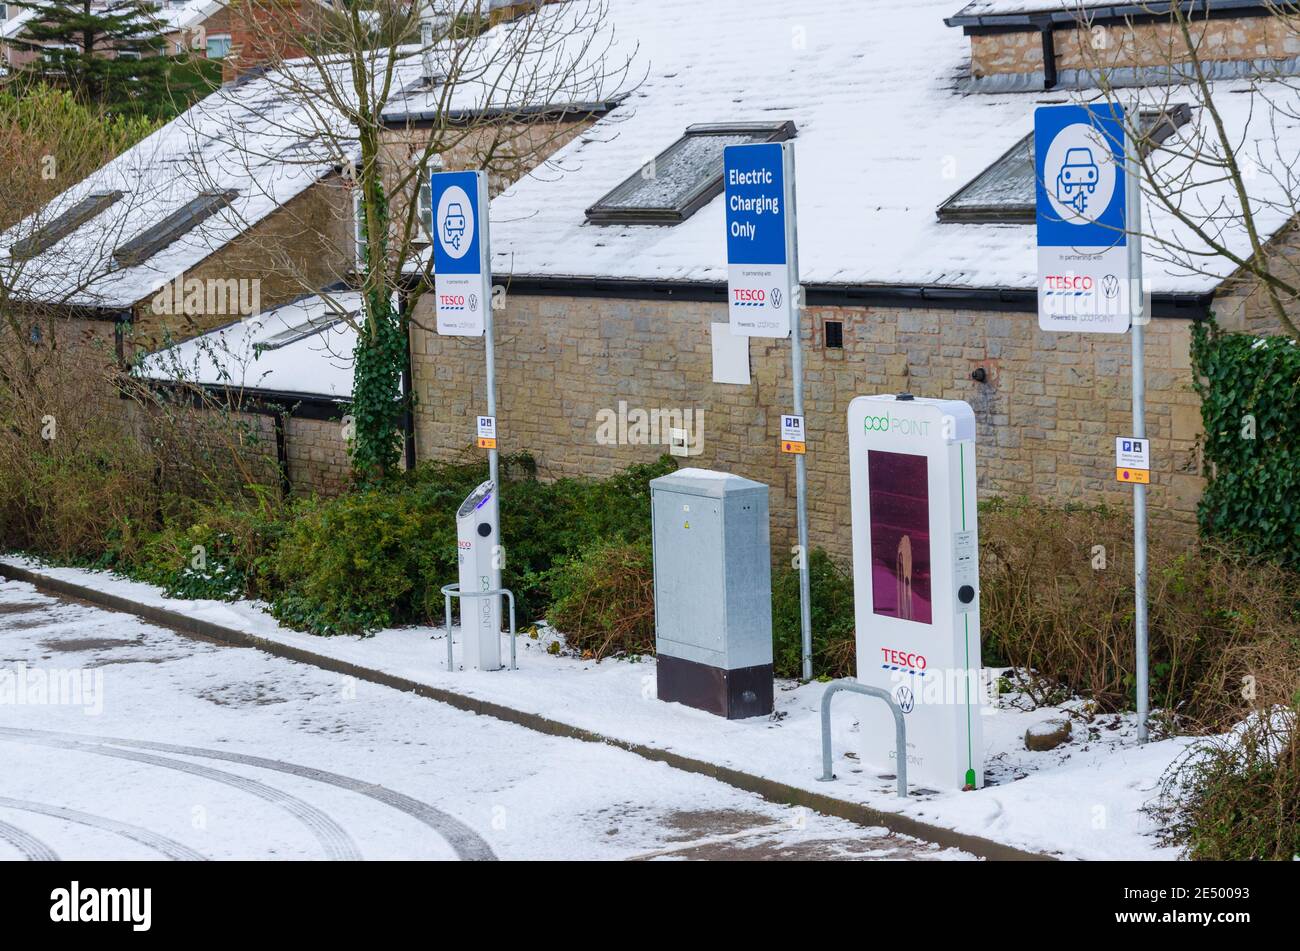 Holywell, Flintshire; UK: Jan 25, 2021: The Holywell branch of a Tesco supermarket has electric vehicle charging points in the car park. Stock Photo